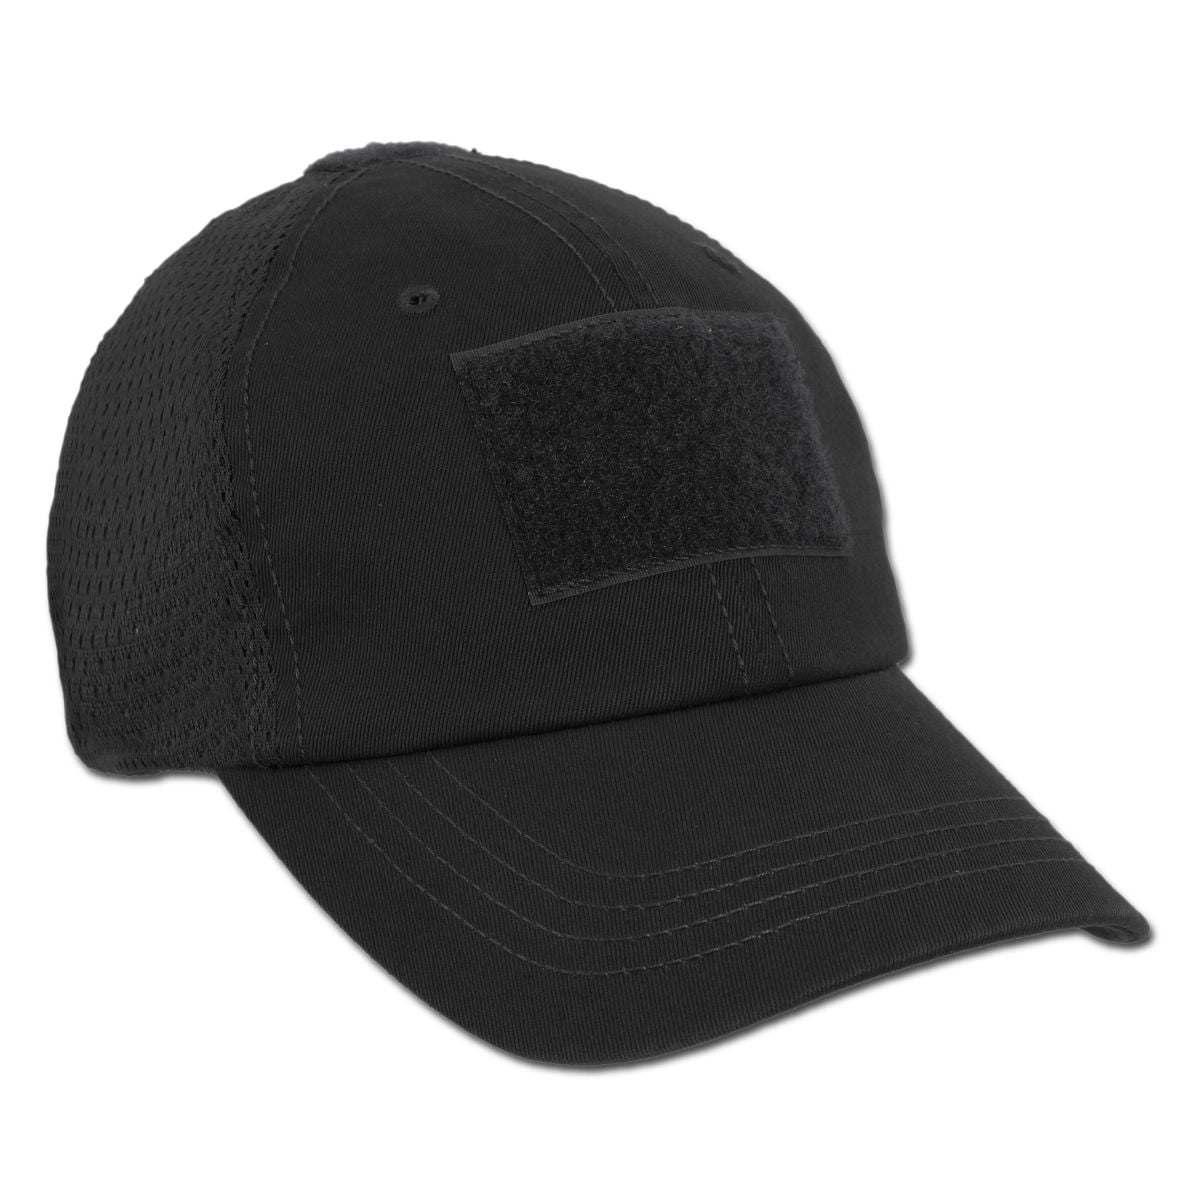 Rothco Mesh Back Special Forces Operator Cap black | Rothco Mesh Back ...